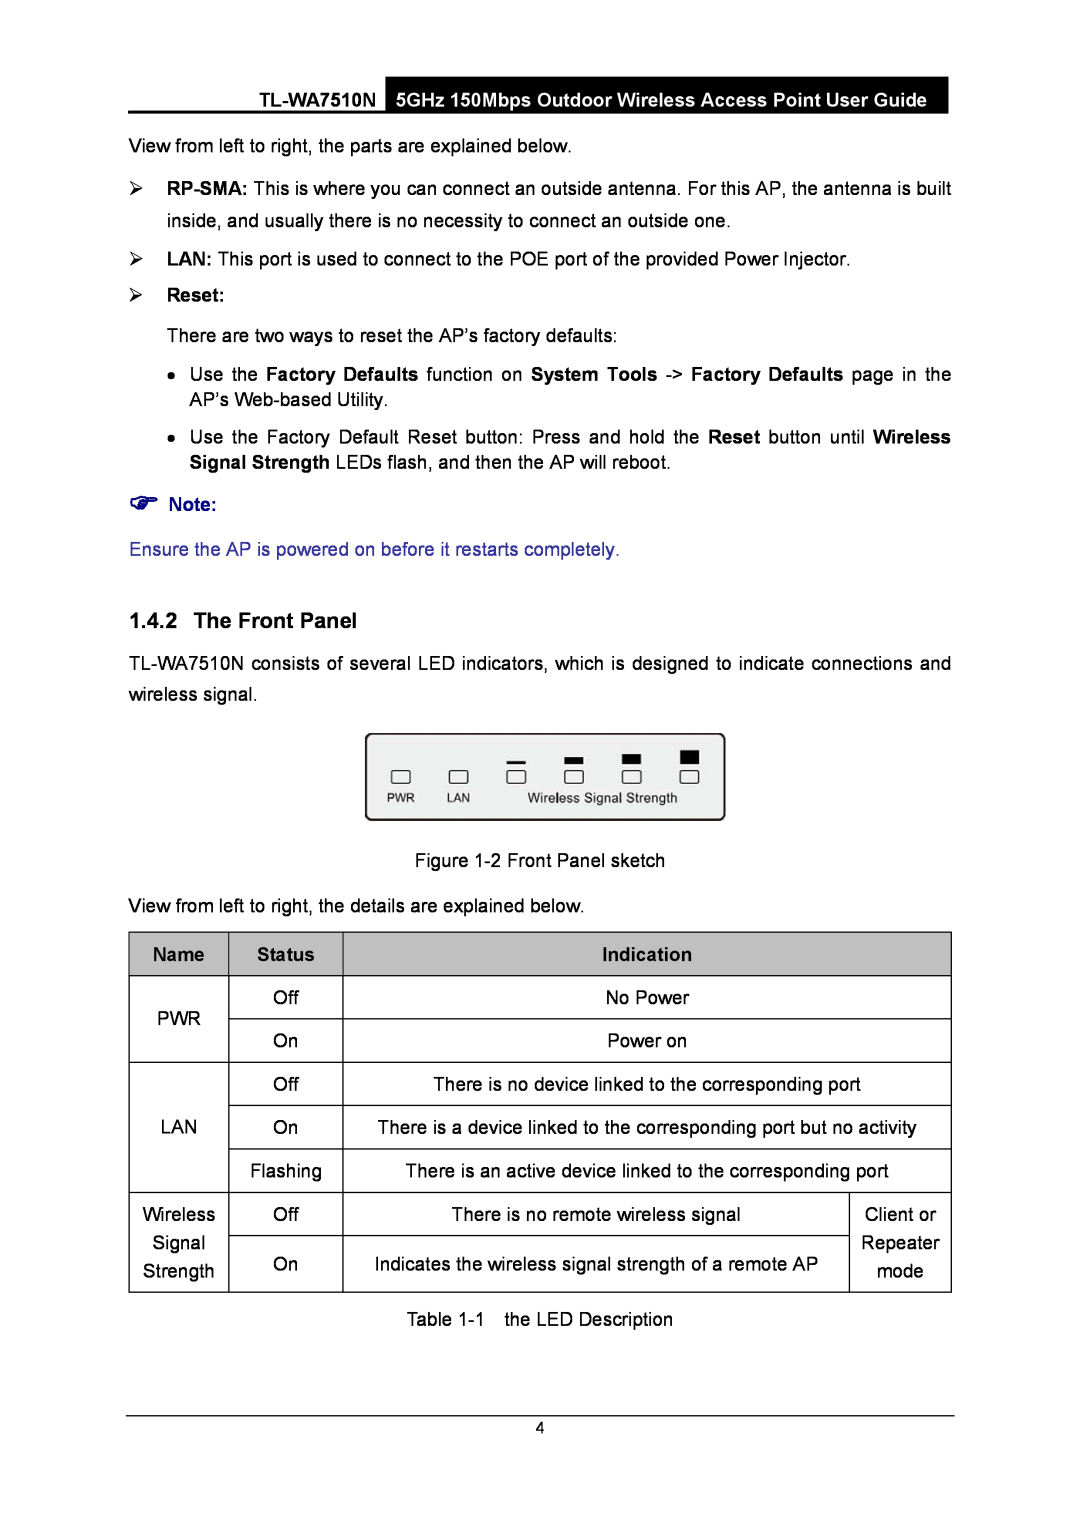 TP-Link manual The Front Panel, TL-WA7510N 5GHz 150Mbps Outdoor Wireless Access Point User Guide, ¾ Reset 